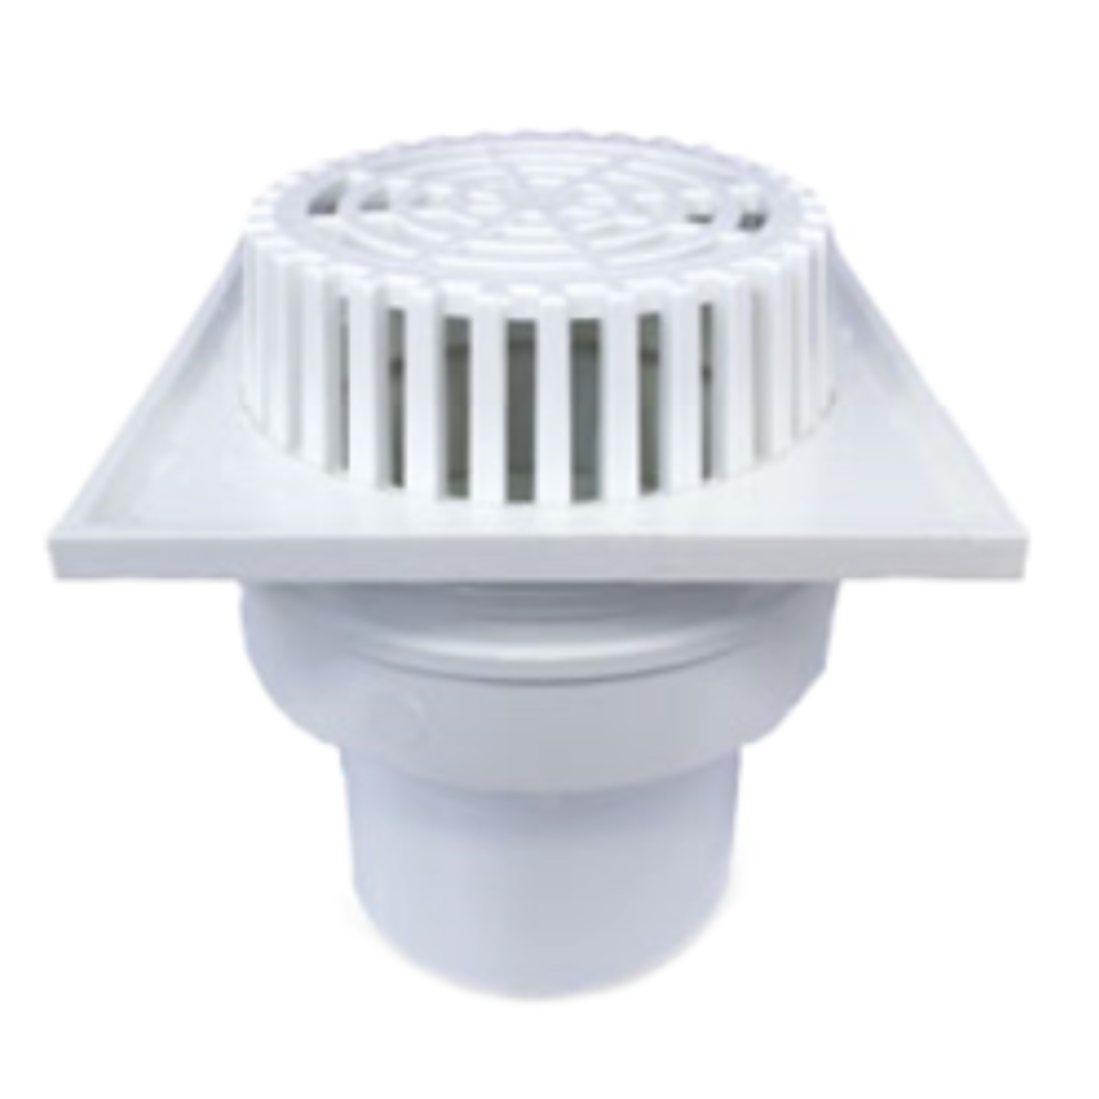 Husky 3"/75MM Dome Balcony Outlet With Square Base 08-BOD3SB213